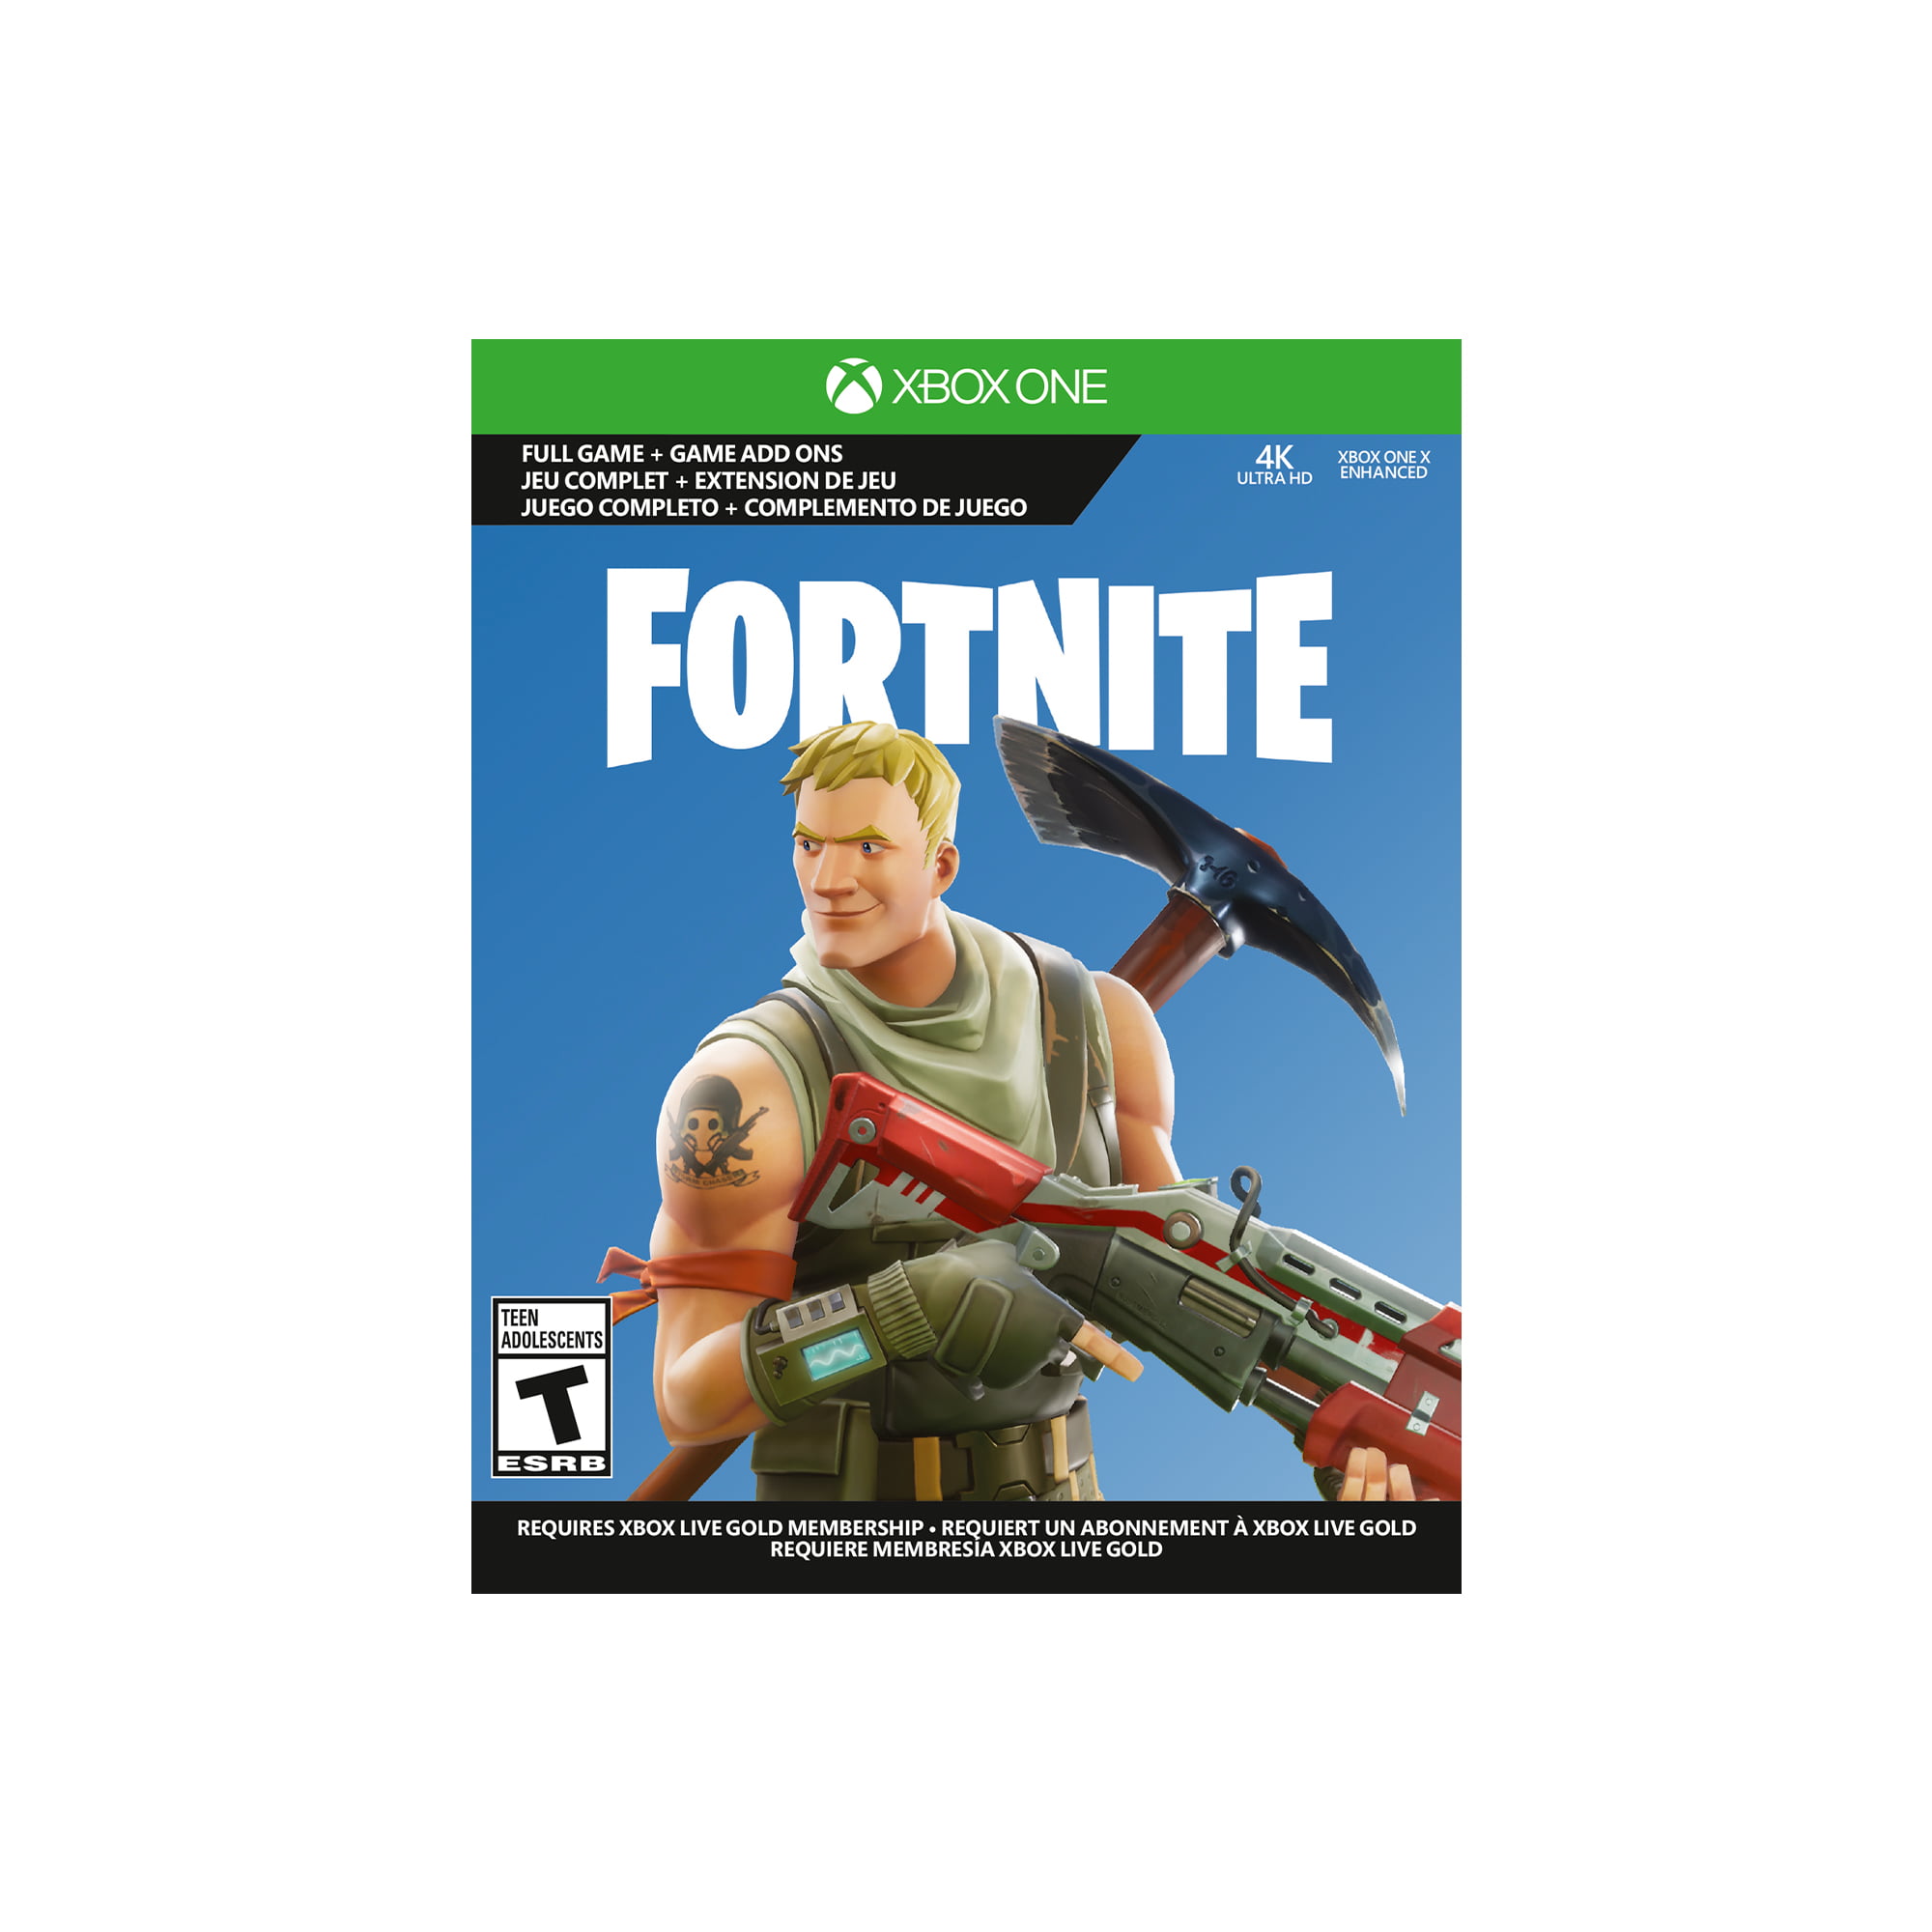  Xbox One S All Digital Edition Console Bundle w/Fortnite  exclusive - Downloads for Minecraft, SOT, & Fornite Battle Royale - 1TB  Hard Drive Capacity - Enjoy disc-free gaming - Includes 1